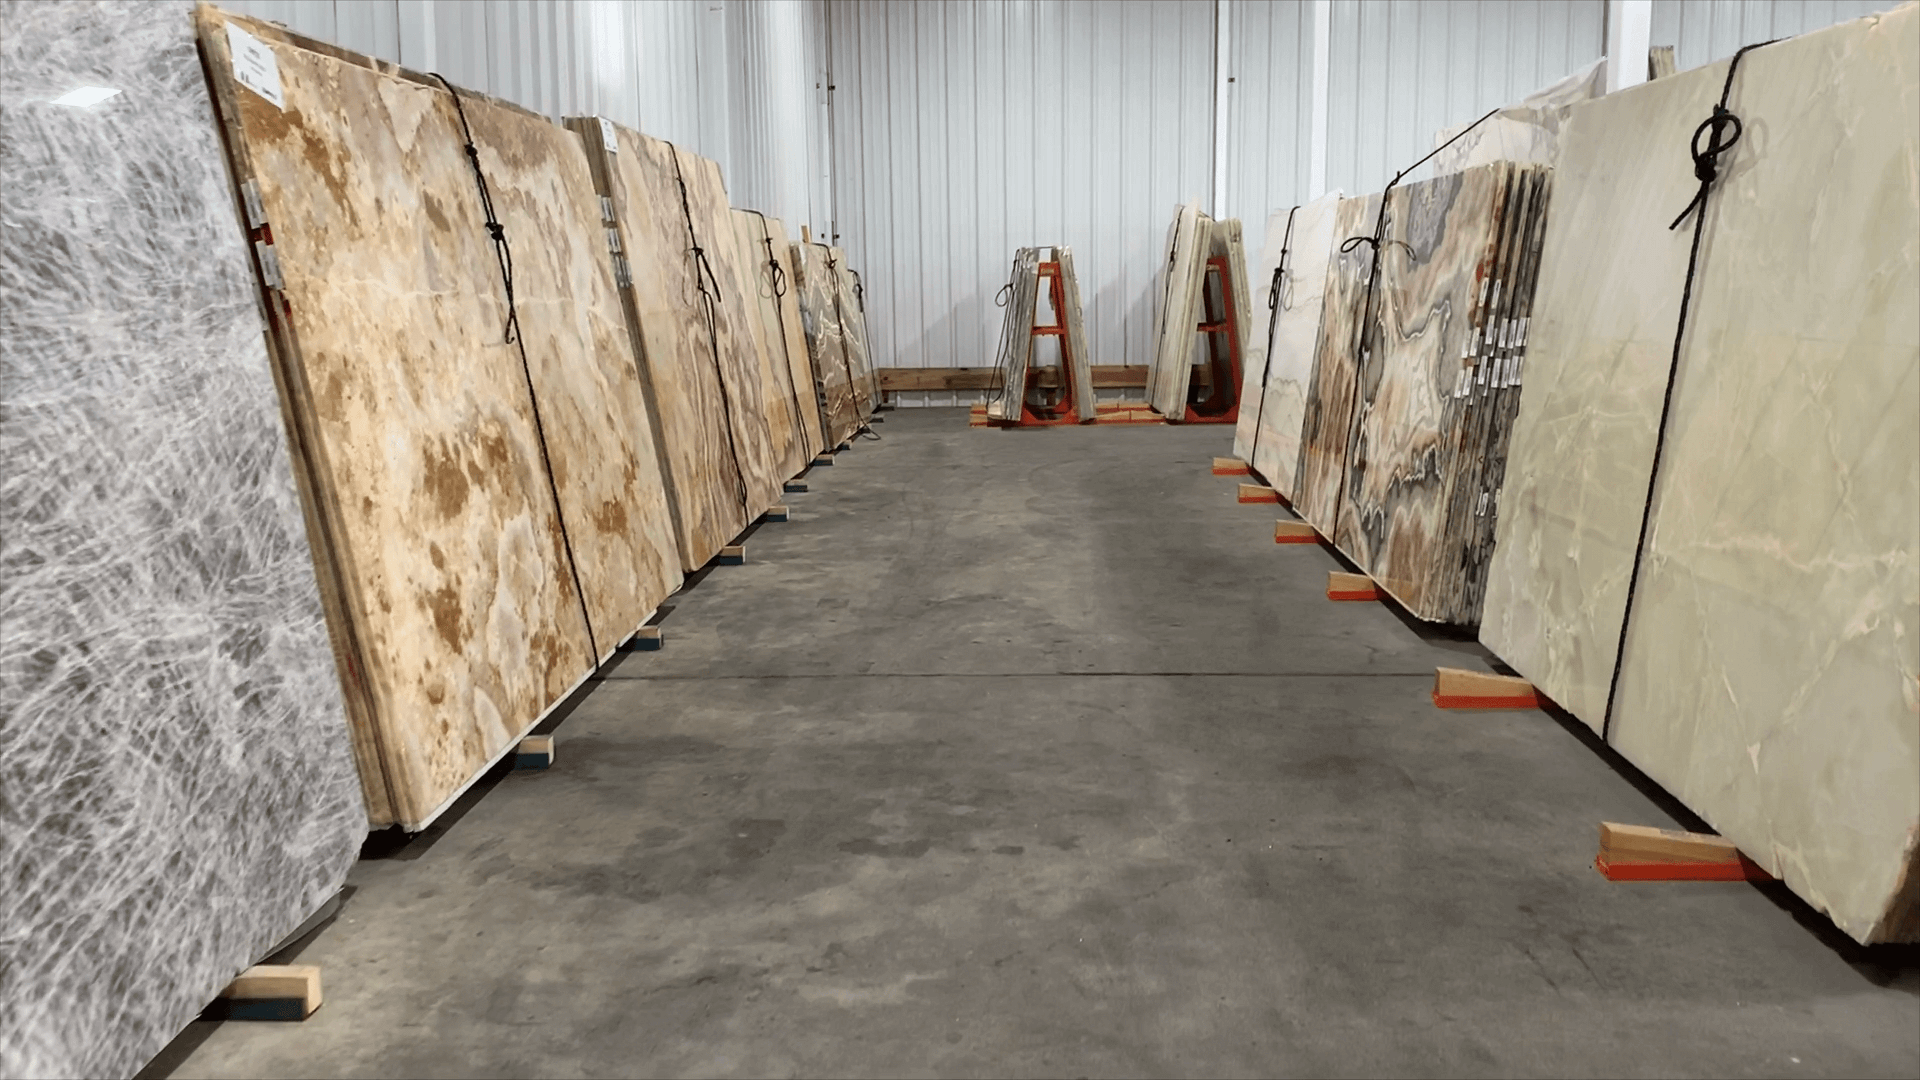 ONYX GALLERY AT STONEVILLE USA